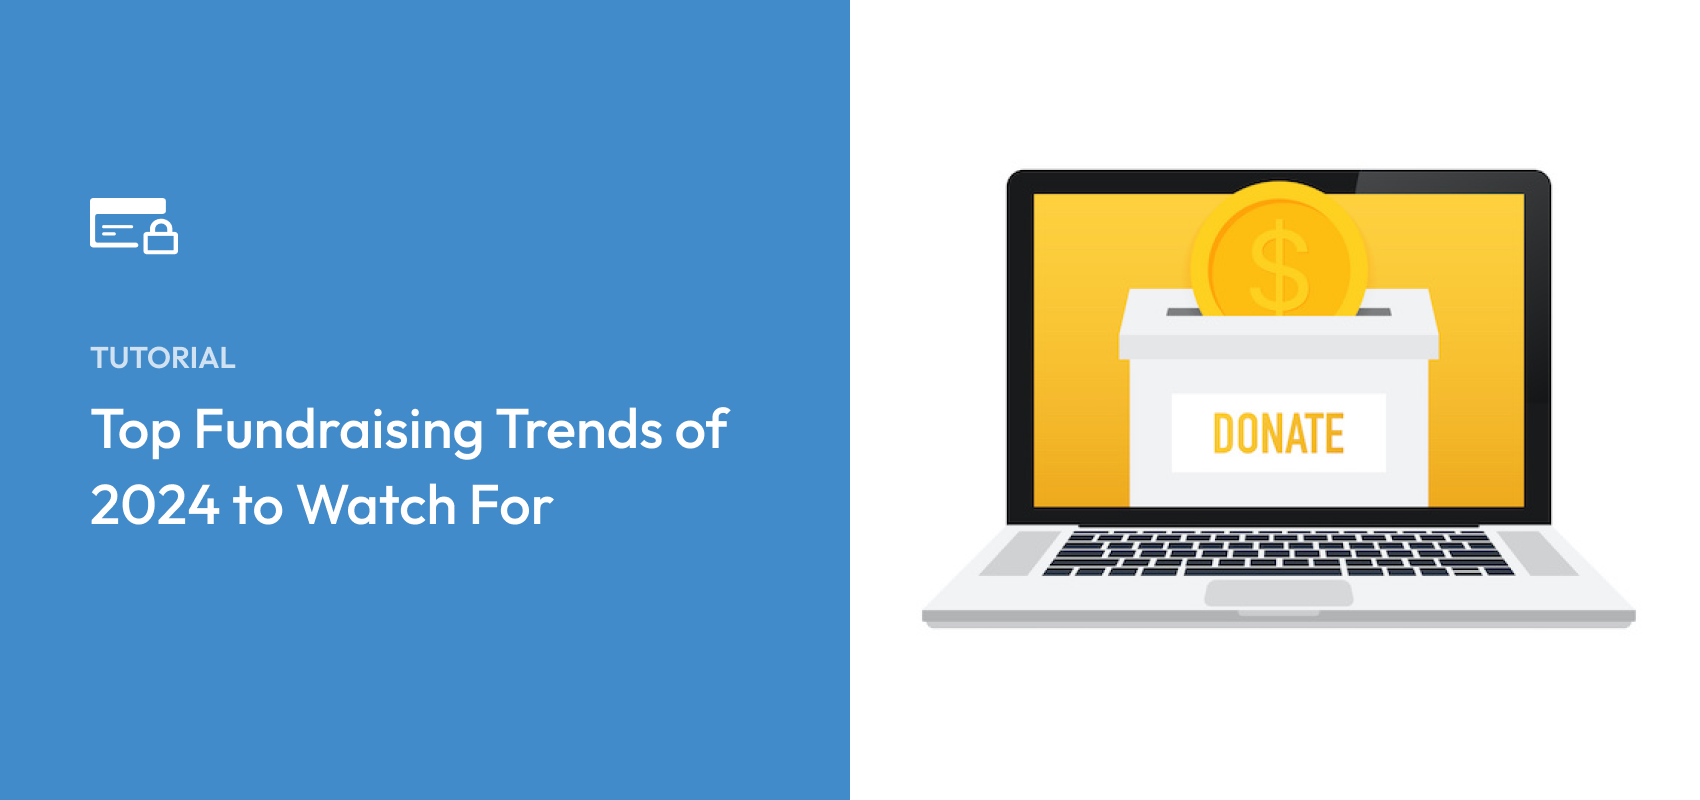 Top Fundraising Trends of 2024 to Watch For